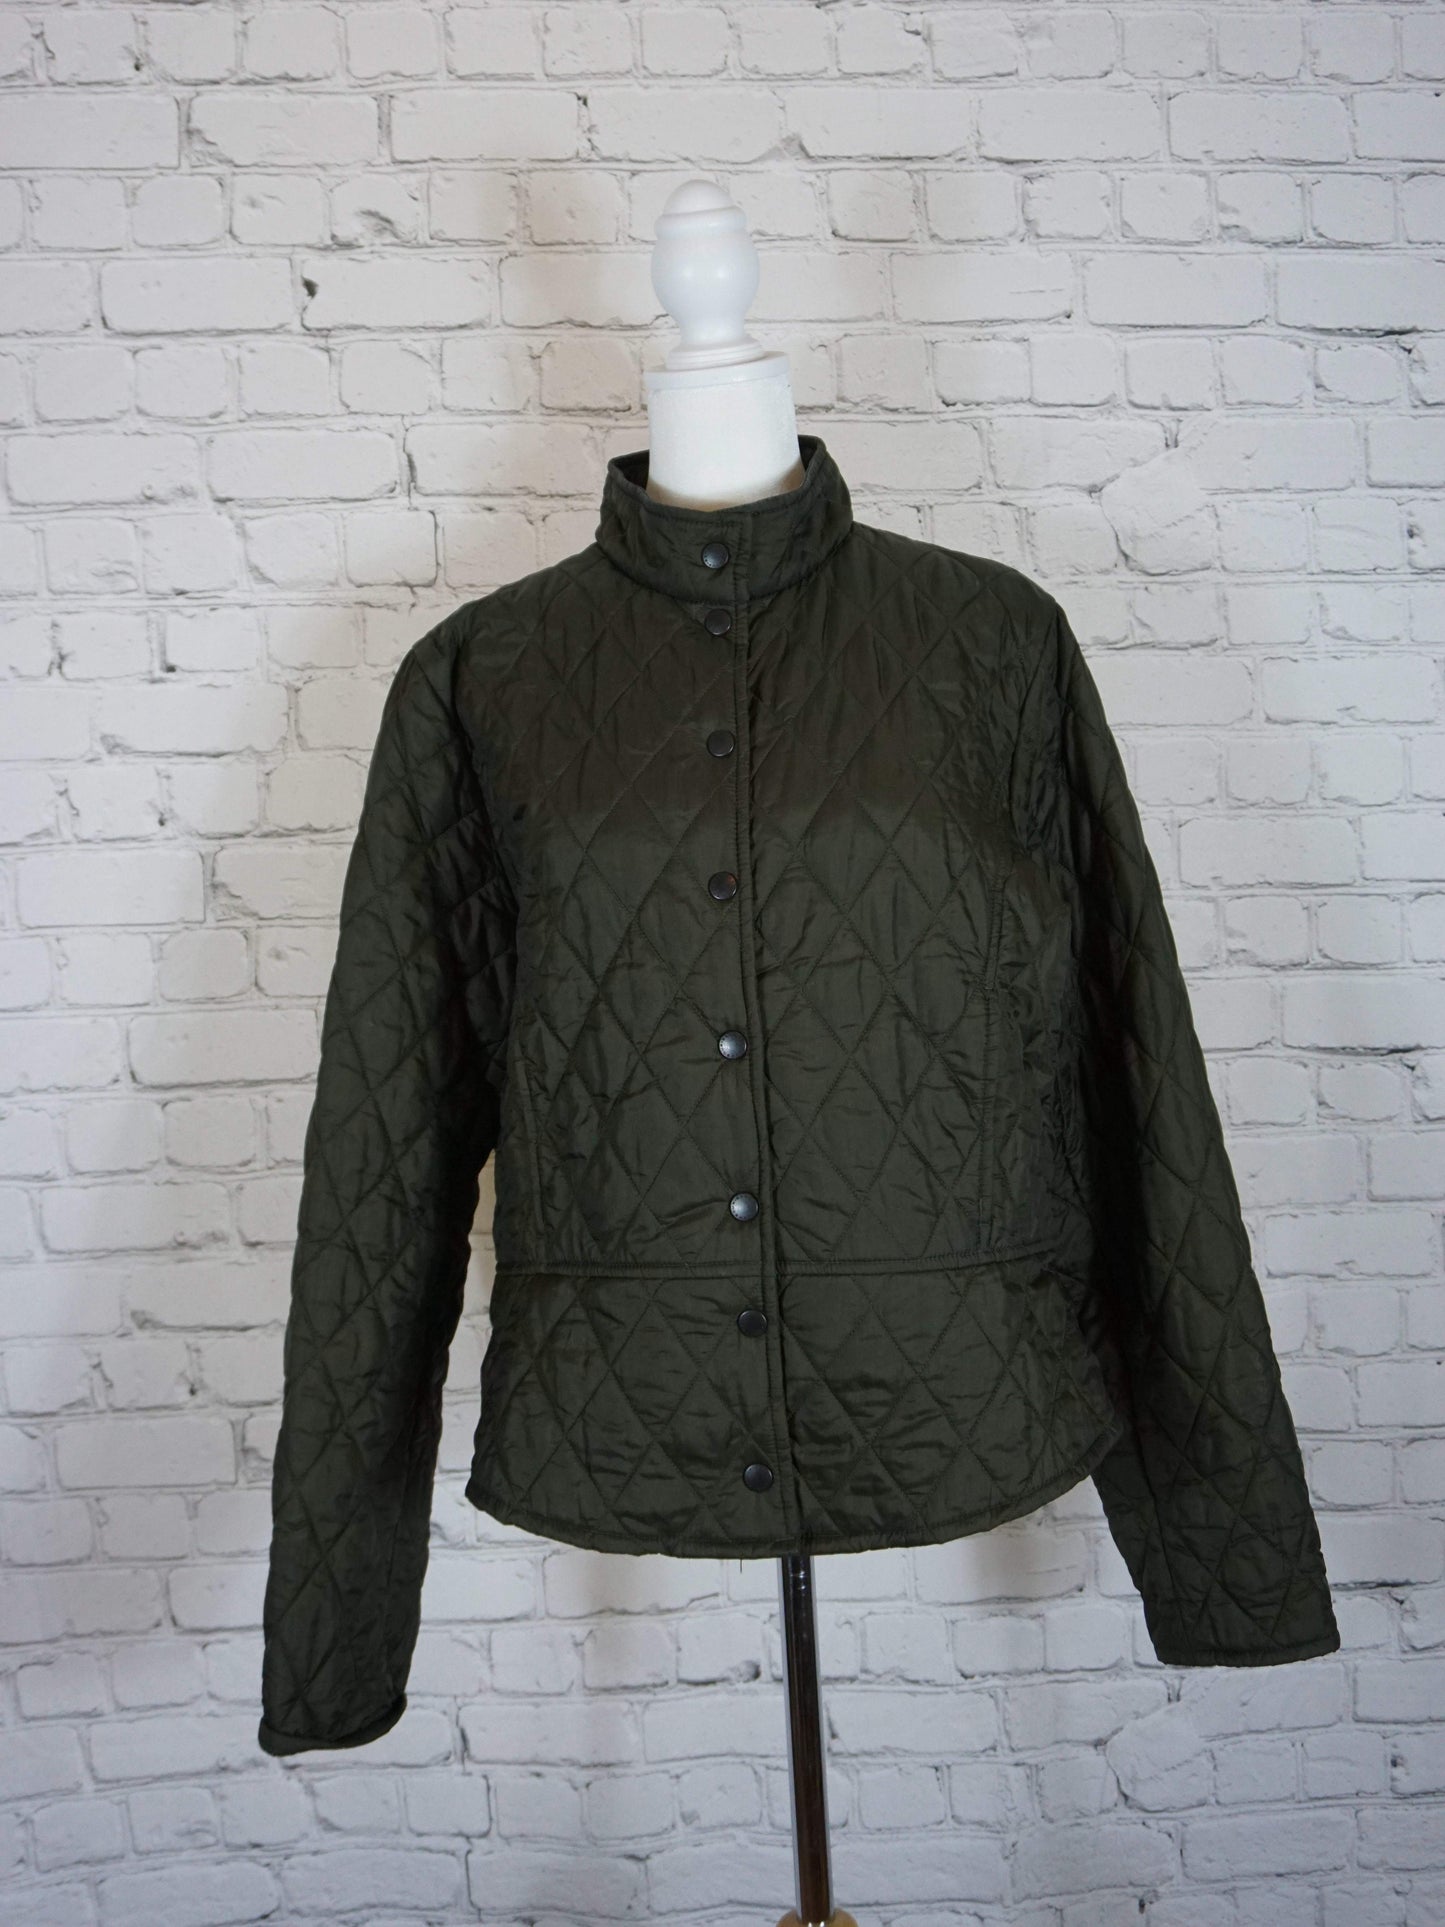 Barbour Women's Quilted Peplum Jacket Size 14